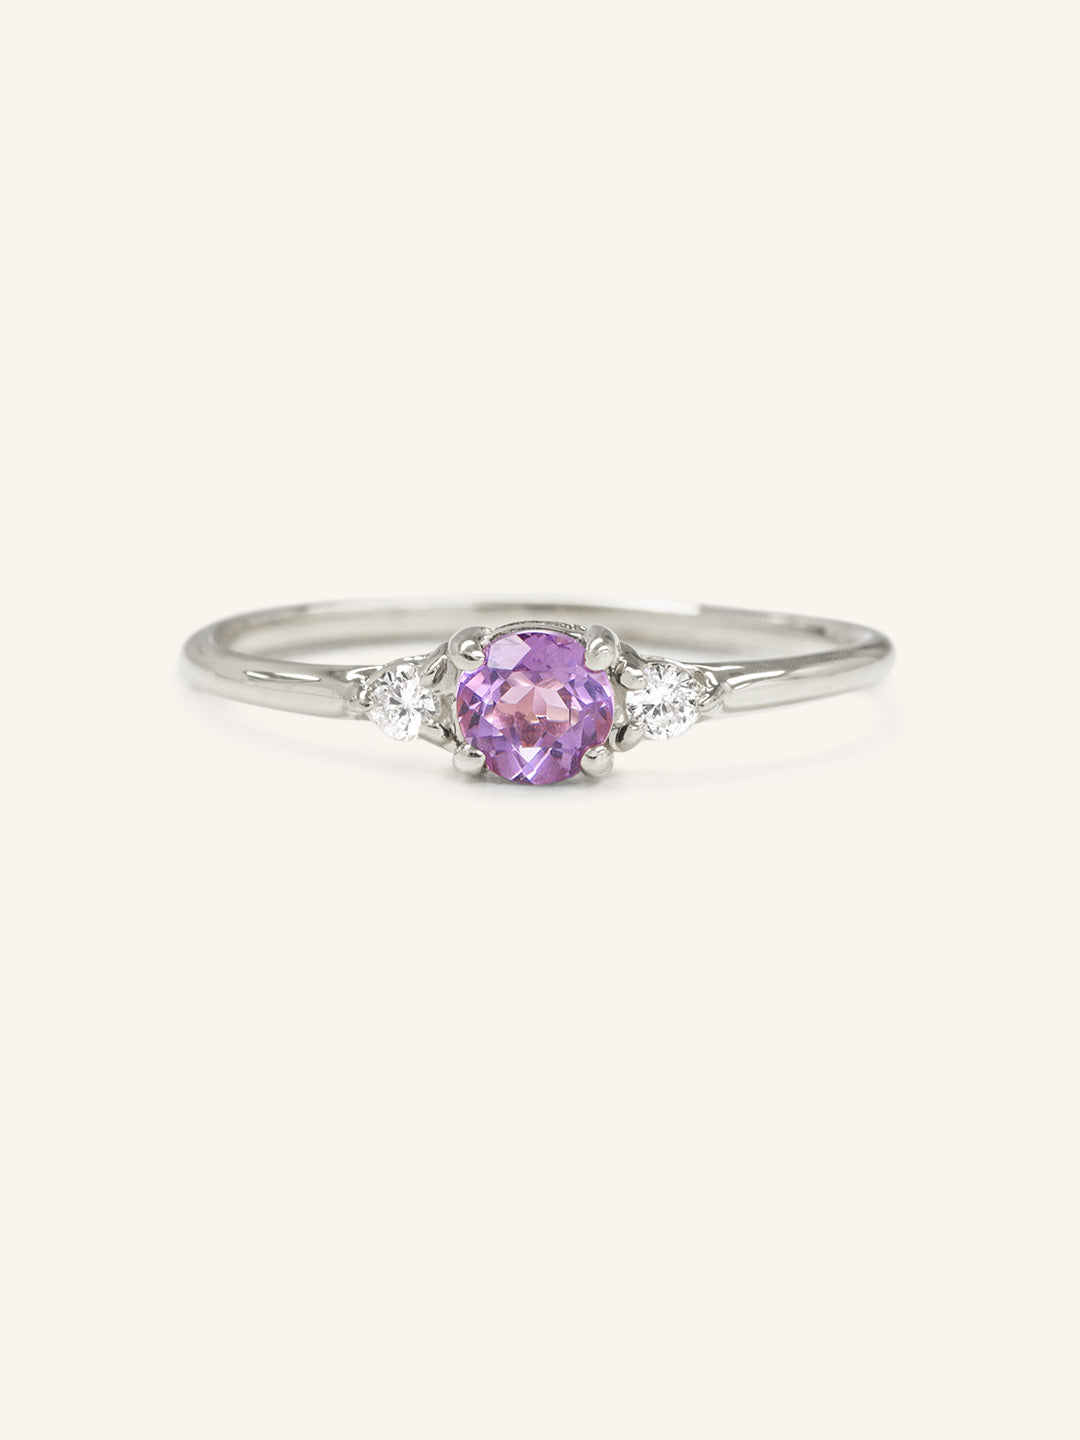 Forget Me Not Amethyst Diamond Ring